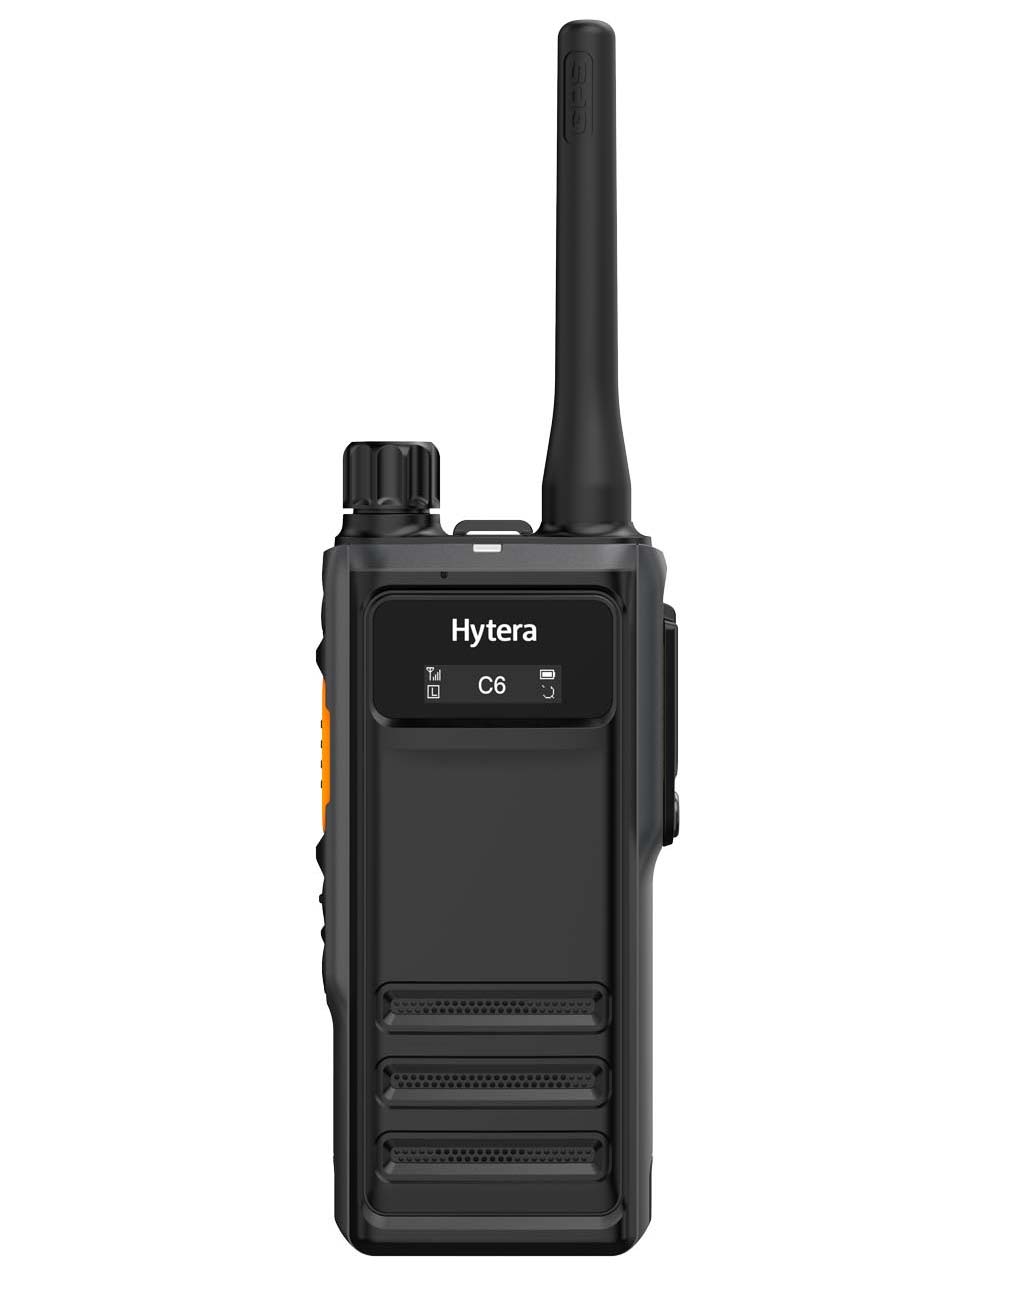 Hytera HP605 Two-Way Radio VHF 136-174MHz IP67 without accessories DMR & analogue HP605 V1